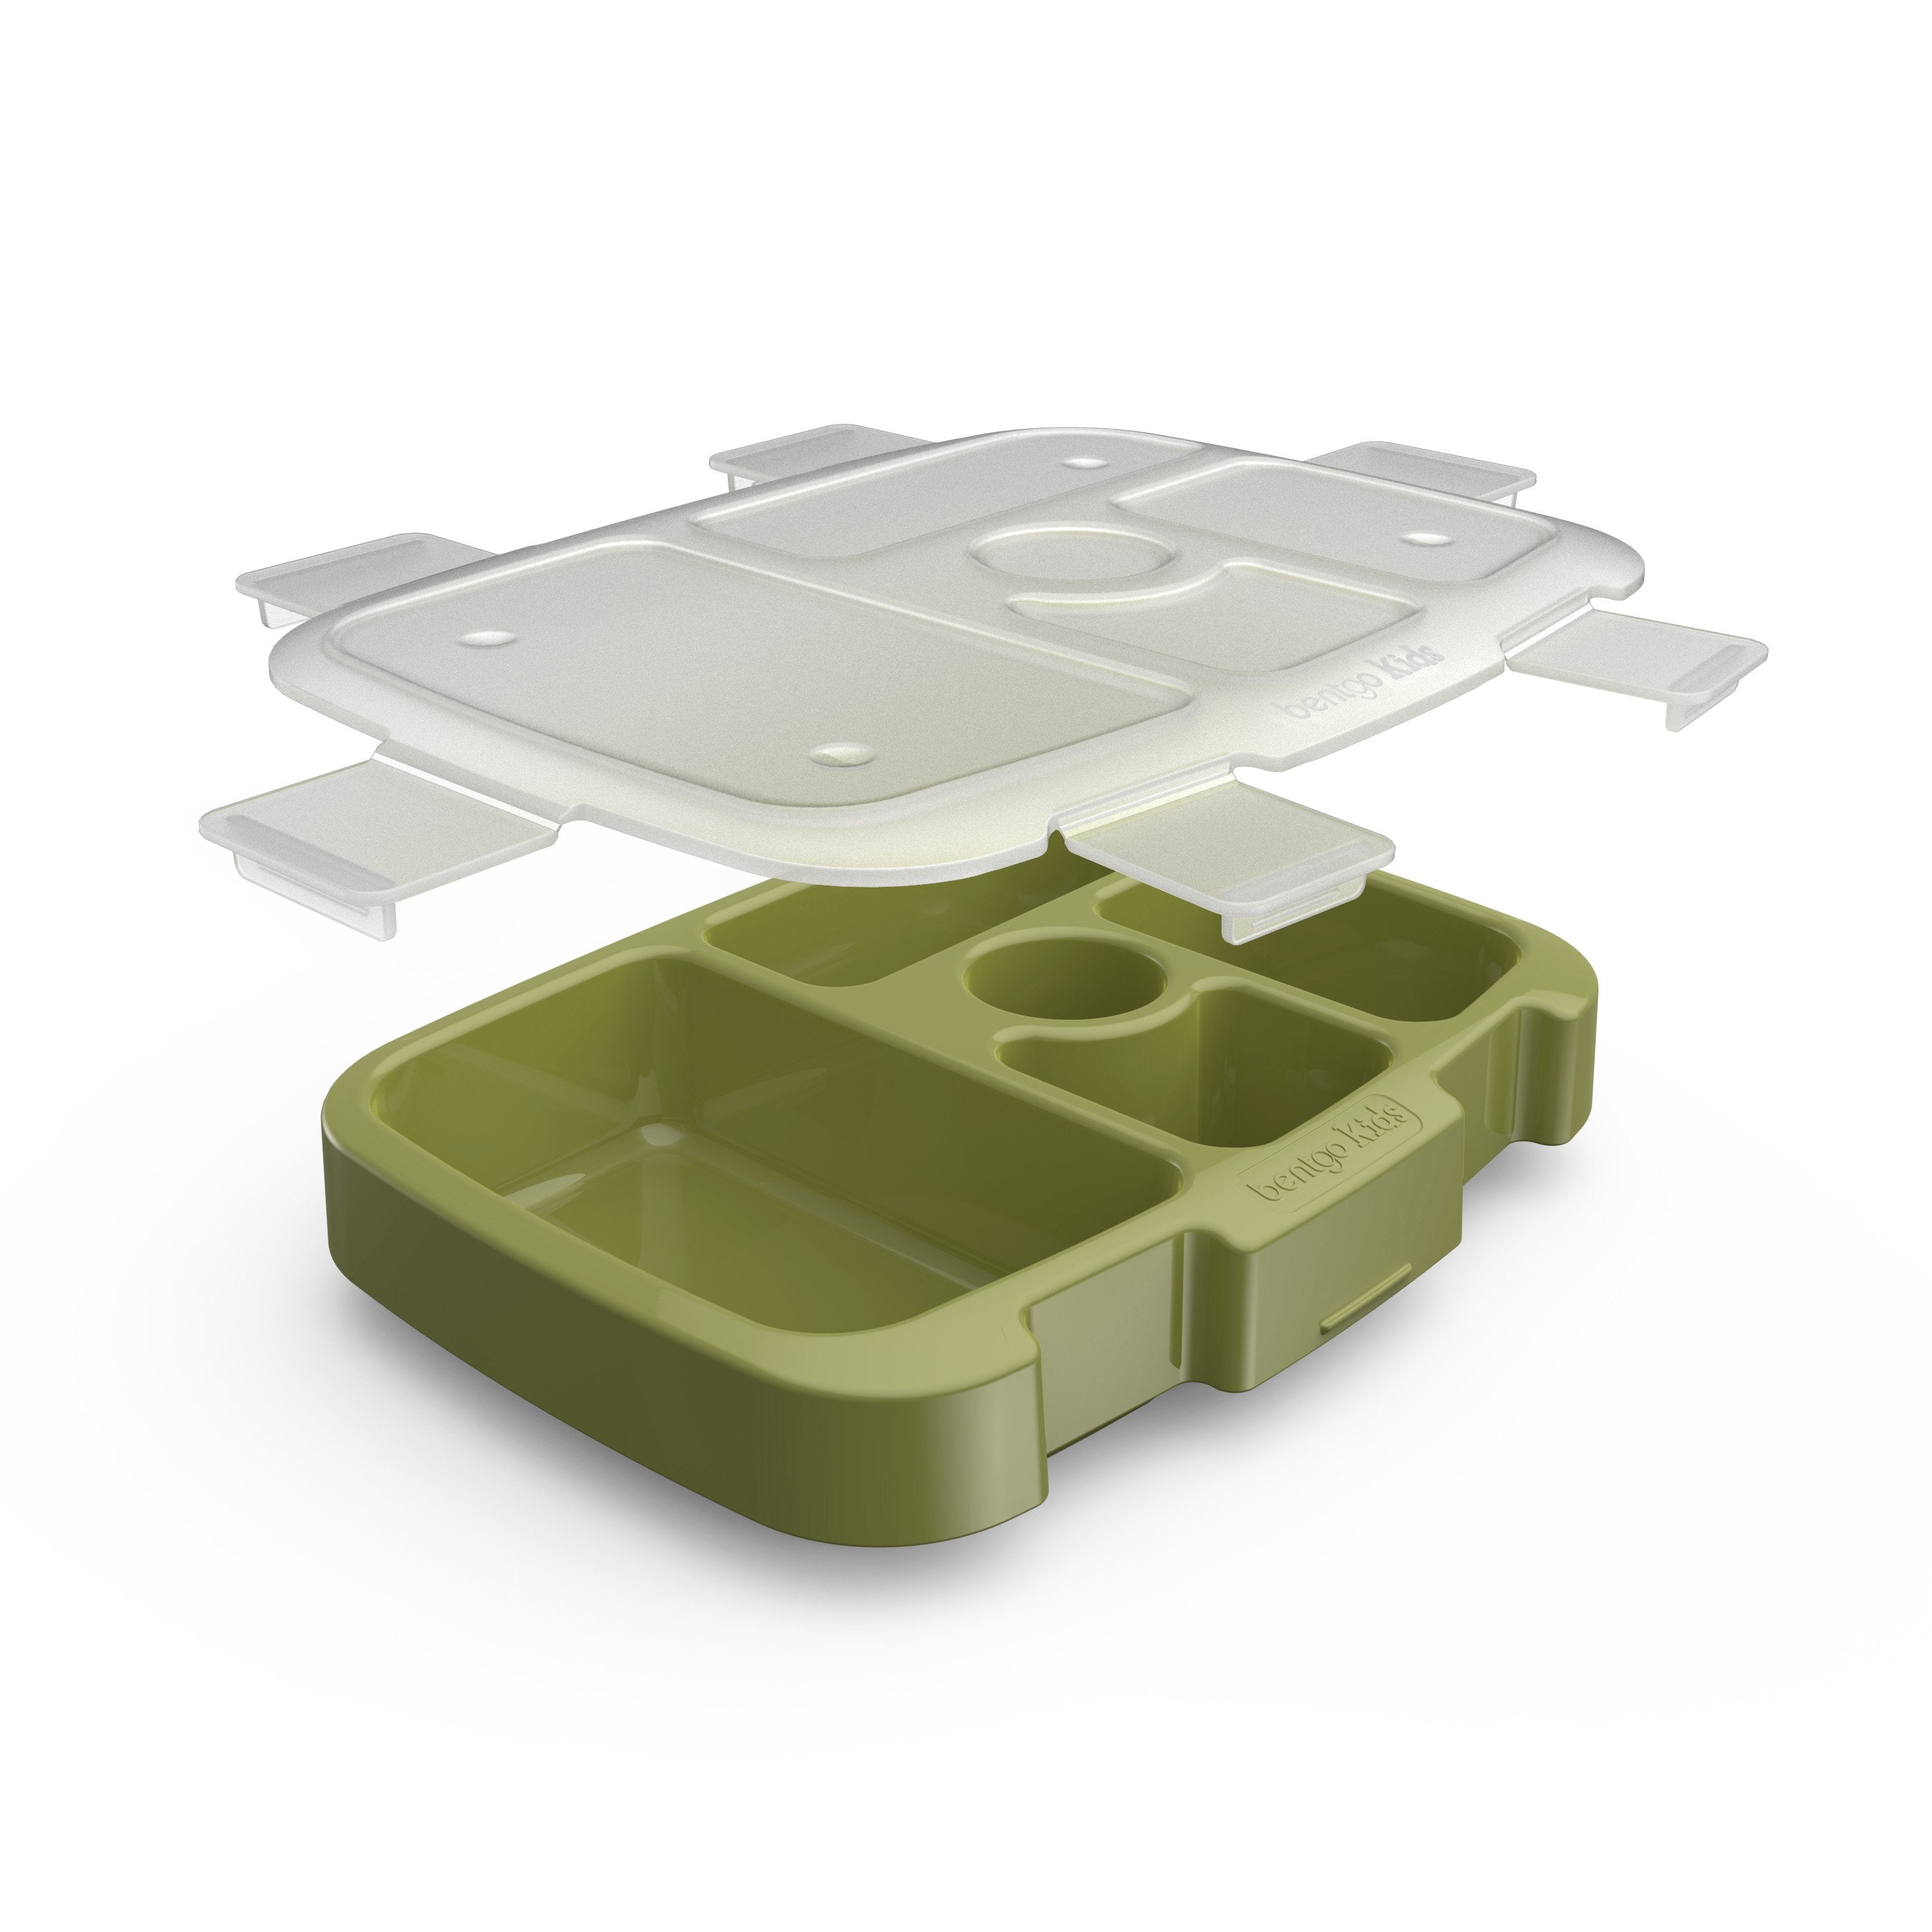 Bentgo Pop Replacement Tray and Cover - Navy Blue/Chartreuse